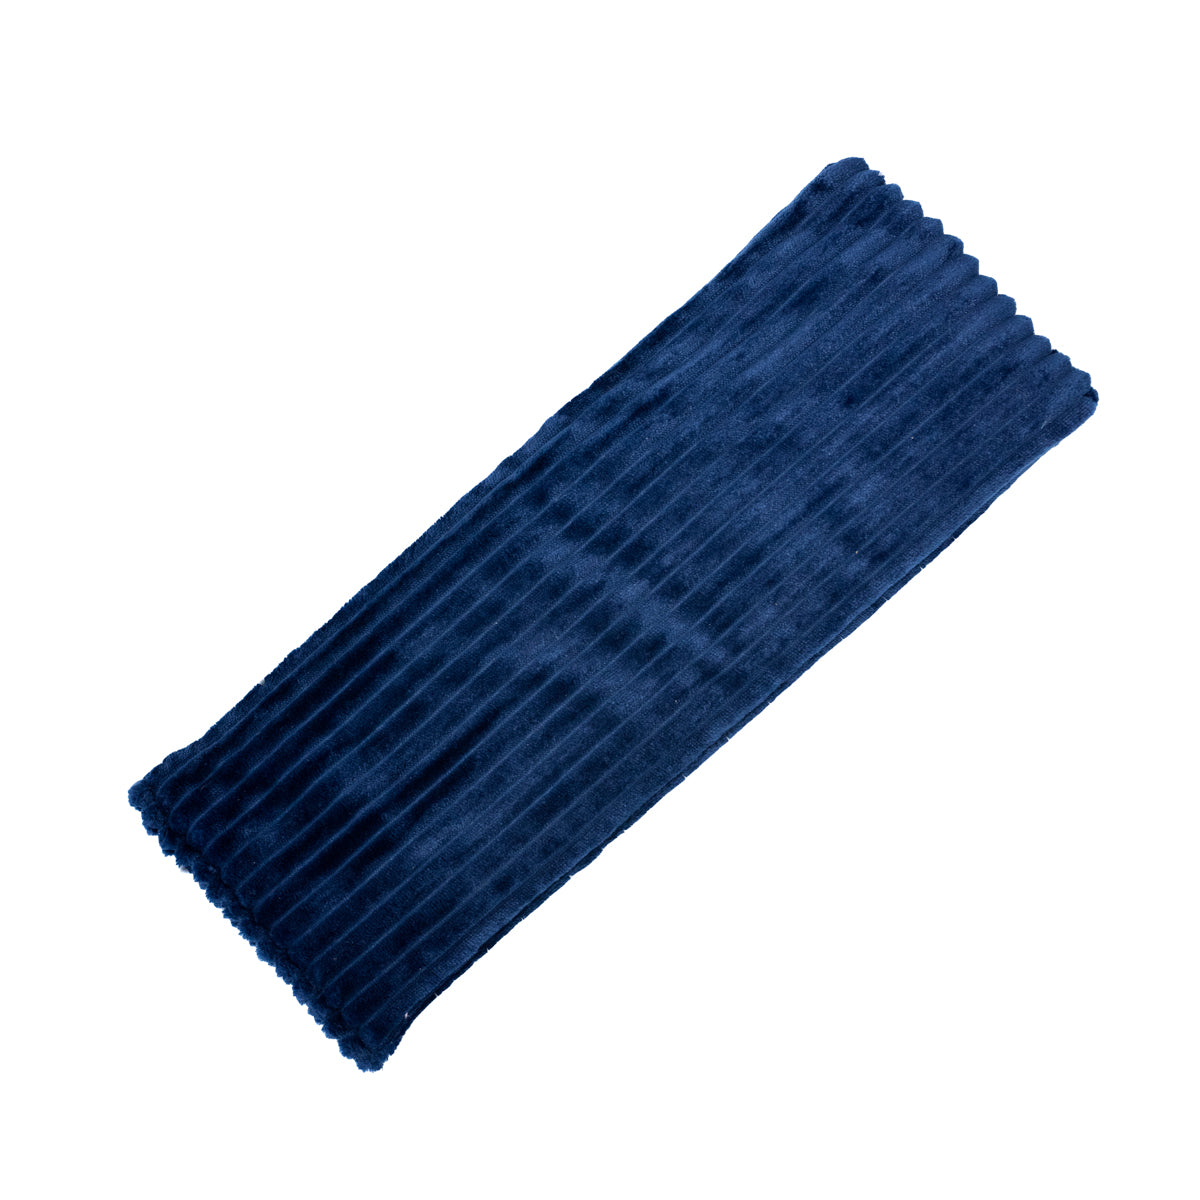 Wheat Bag - Navy Thick Cord - The Grain Shop Online Store